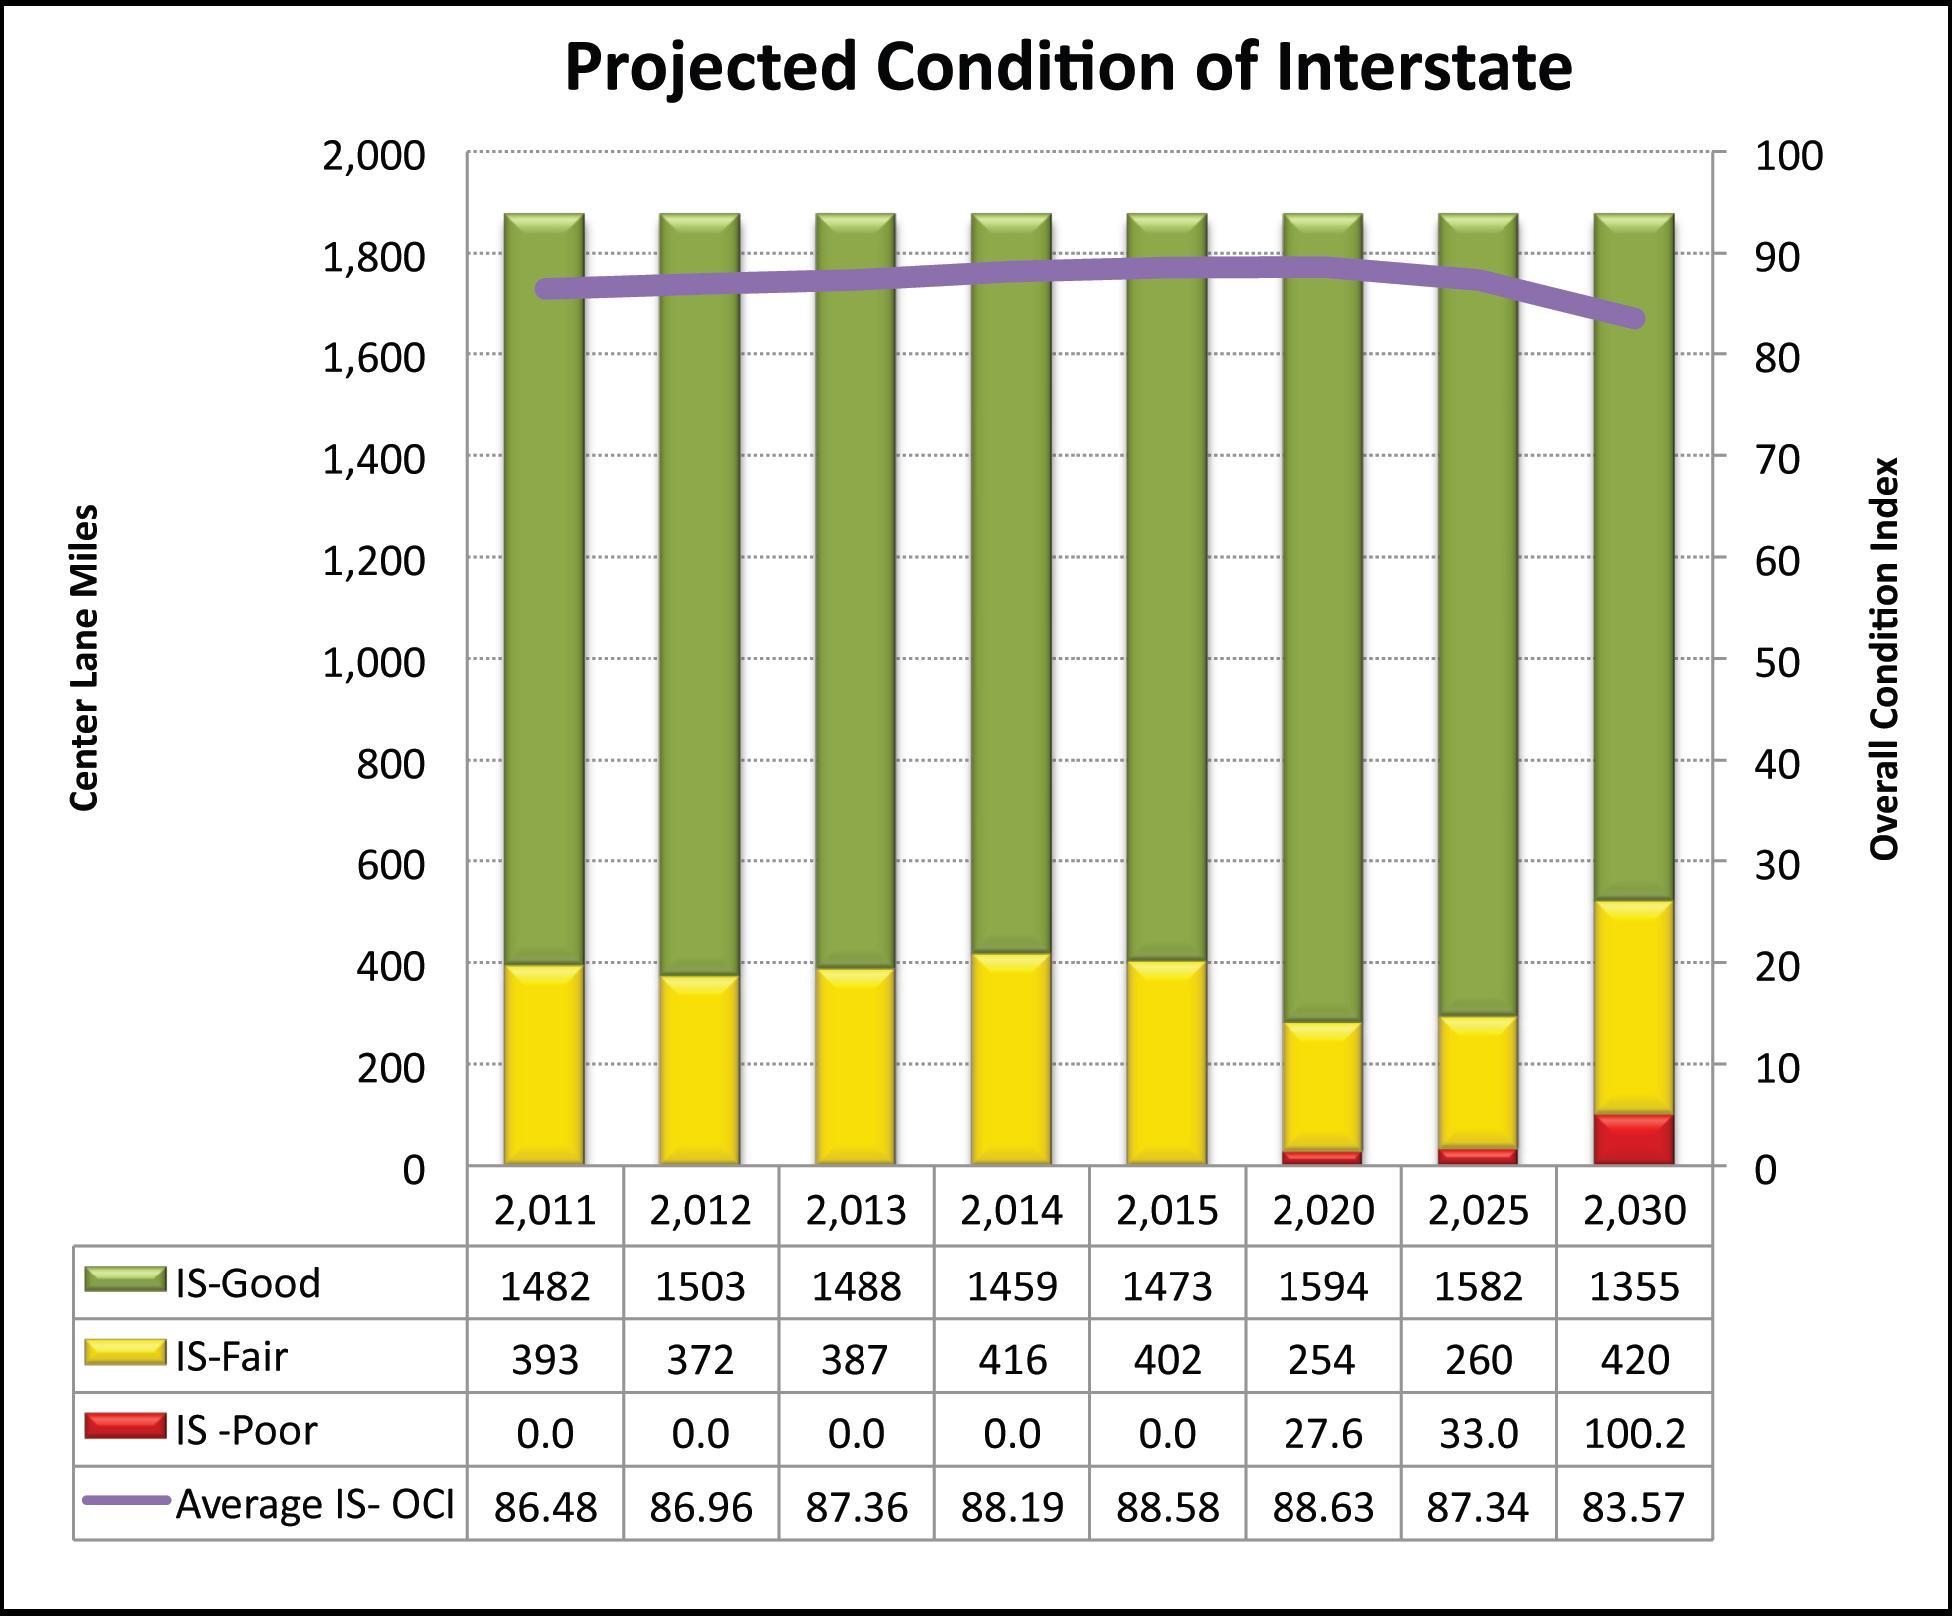 Figure 24 illustrates the projected pavement conditions for the Utah Interstate Highway System from 2011 through 2030.  The stacked, vertical bars indicate that the miles of pavement in good condition begins in 2011 at 1418 miles and remains approximately at that level through 2025 when the miles of good pavement increases to 1582 before decreasing in 2030 to 1354. The overall trend is that the conditions remain overall about the same for the miles of pavement in good condition on the Interstate Highway System.  The miles of Fair pavement also remains about the same through the period. The miles of fair pavmement is at 393 miles in 2011 and undulates somewhat until 2030 when they are at 420 miles. However, the miles of Interstate Highway System pavement in poor condition increases from zero in 2011 through 2015 to 27 point six miles in 2020 and increases to 100 miles by 2030.